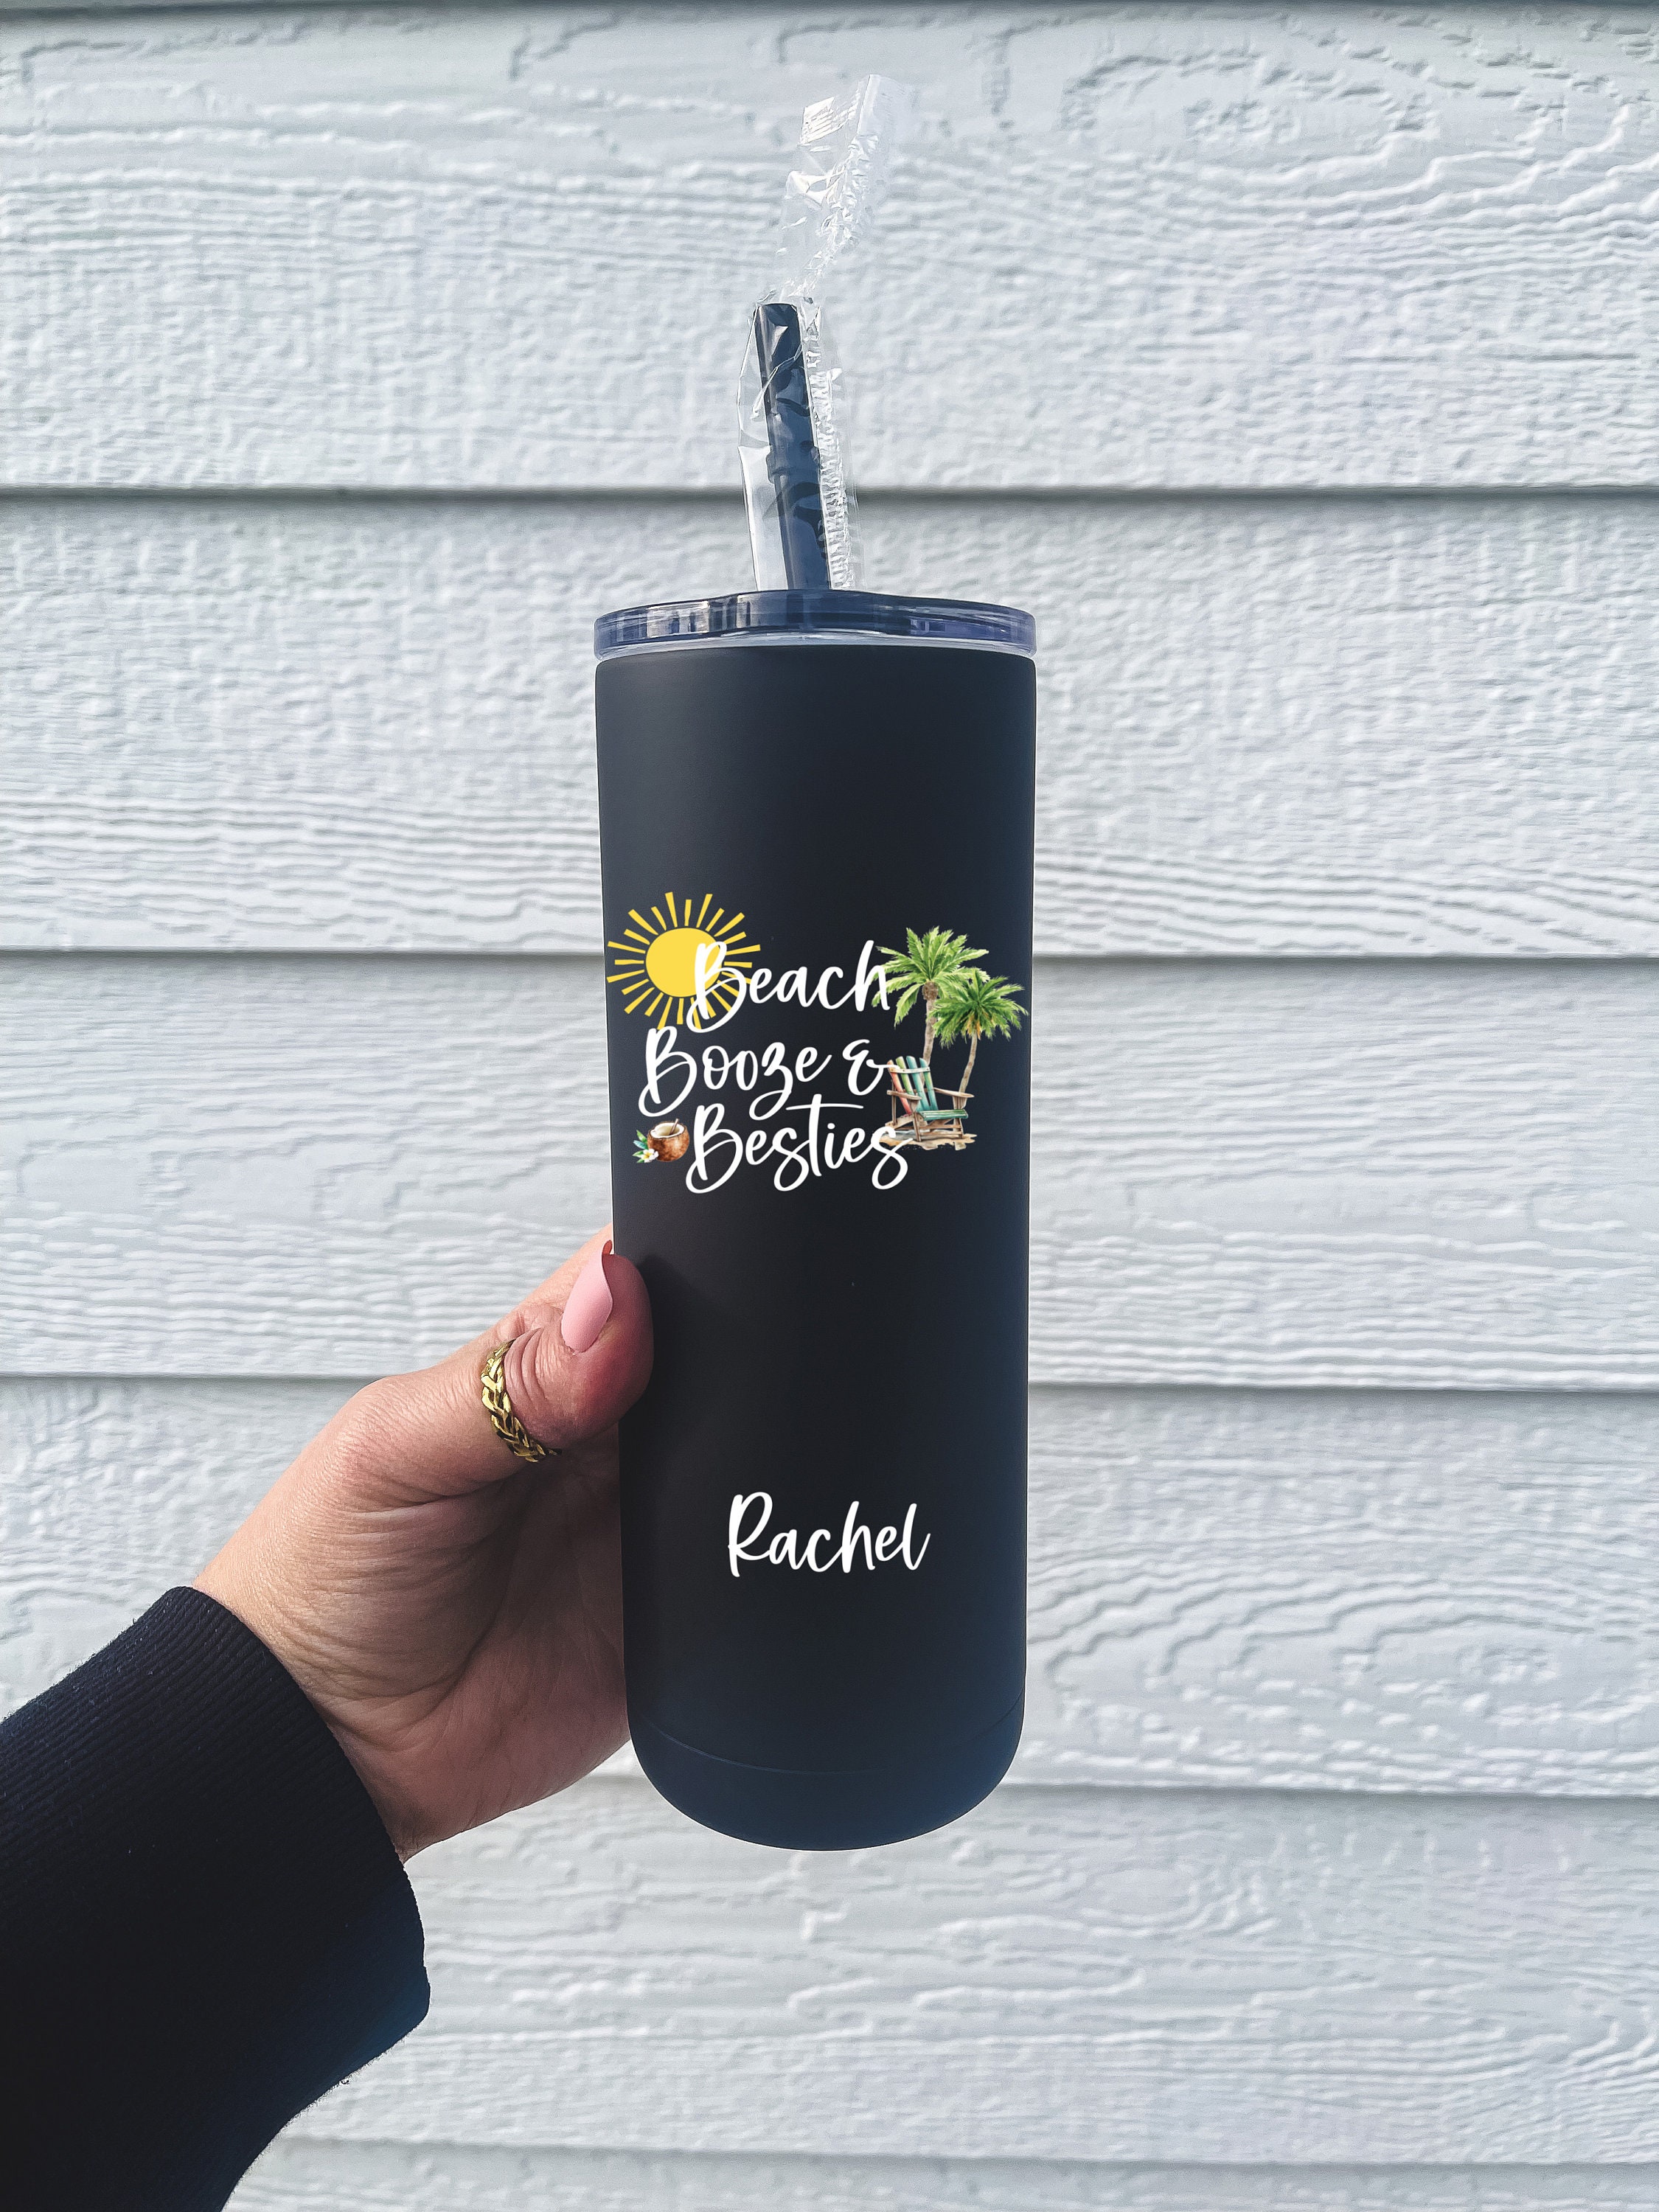 16 oz Stainless Steel Double Wall Insulated Tumbler Pool Beach Cup Travel Mug with Straw Palmetto Tree South Carolina Palm Moon (Light Pink)